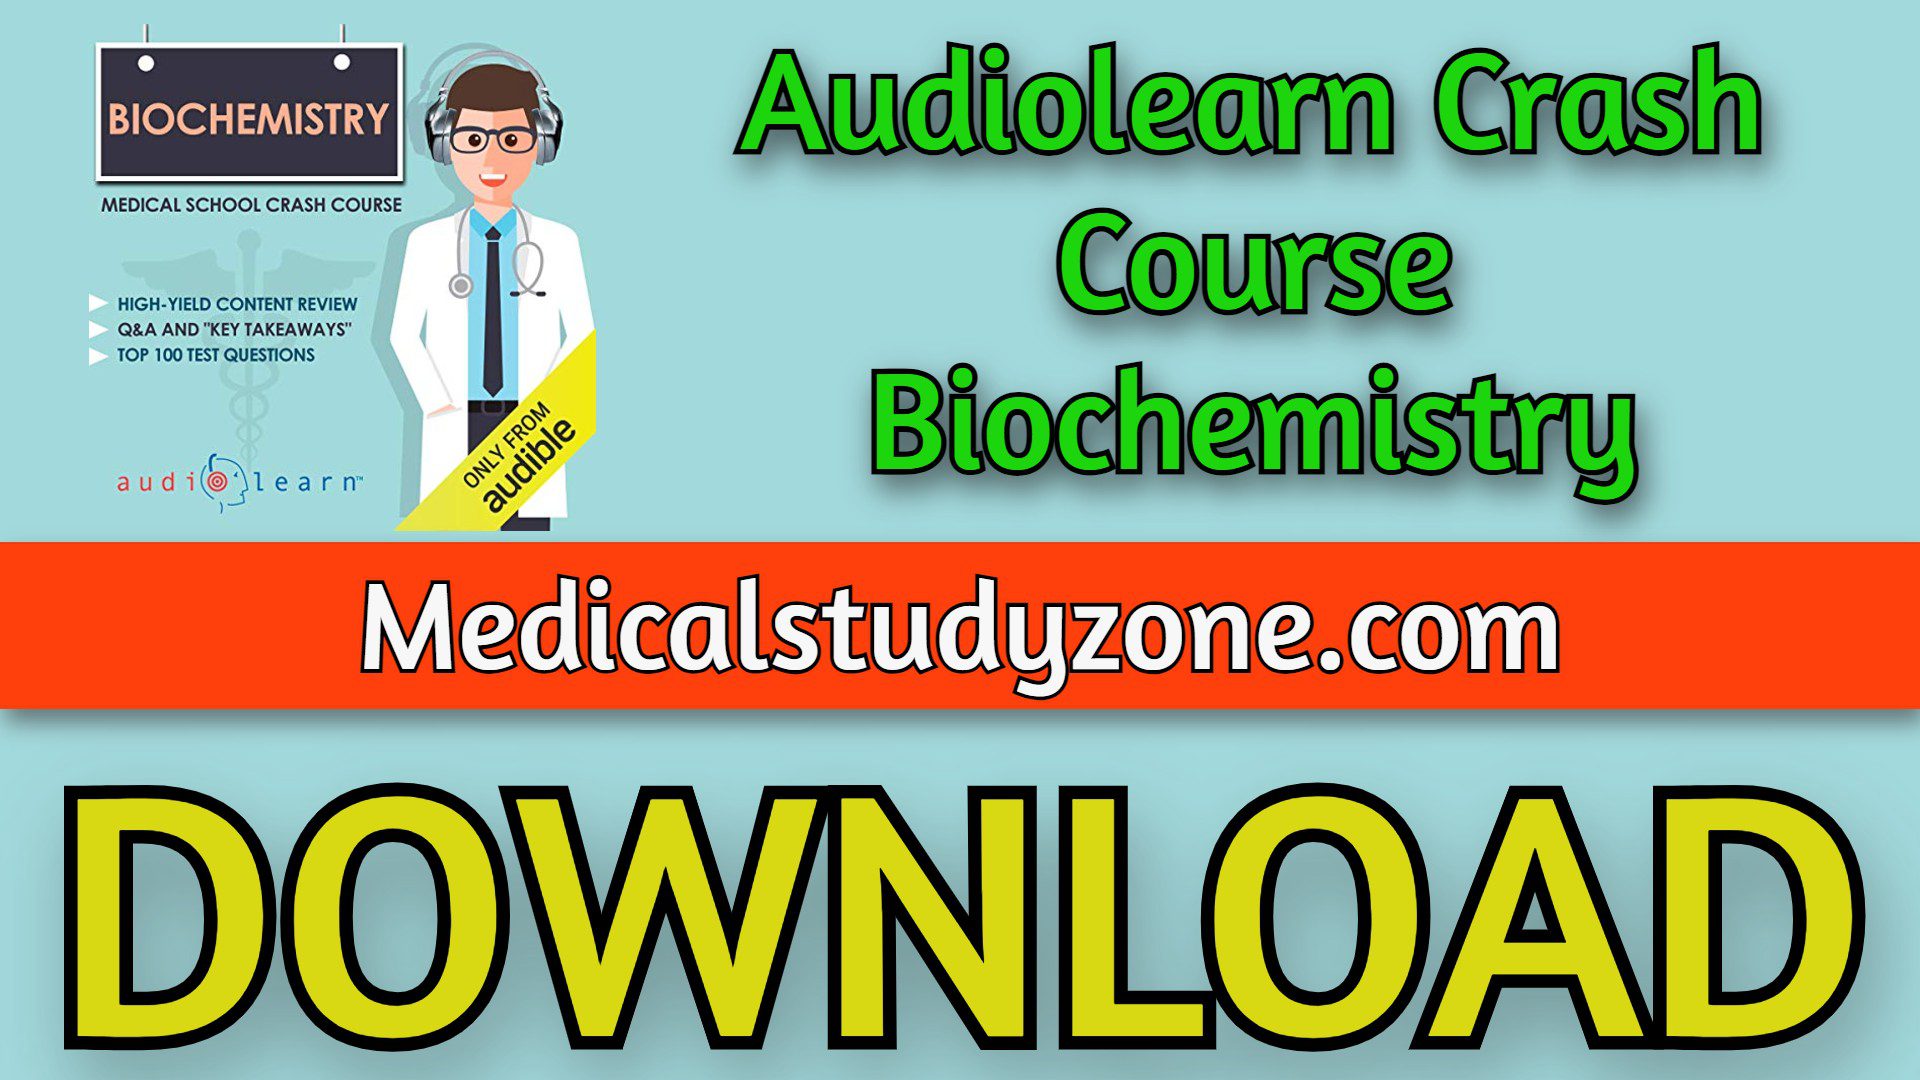 Audiolearn Crash Course Biochemistry 2021 Free Download